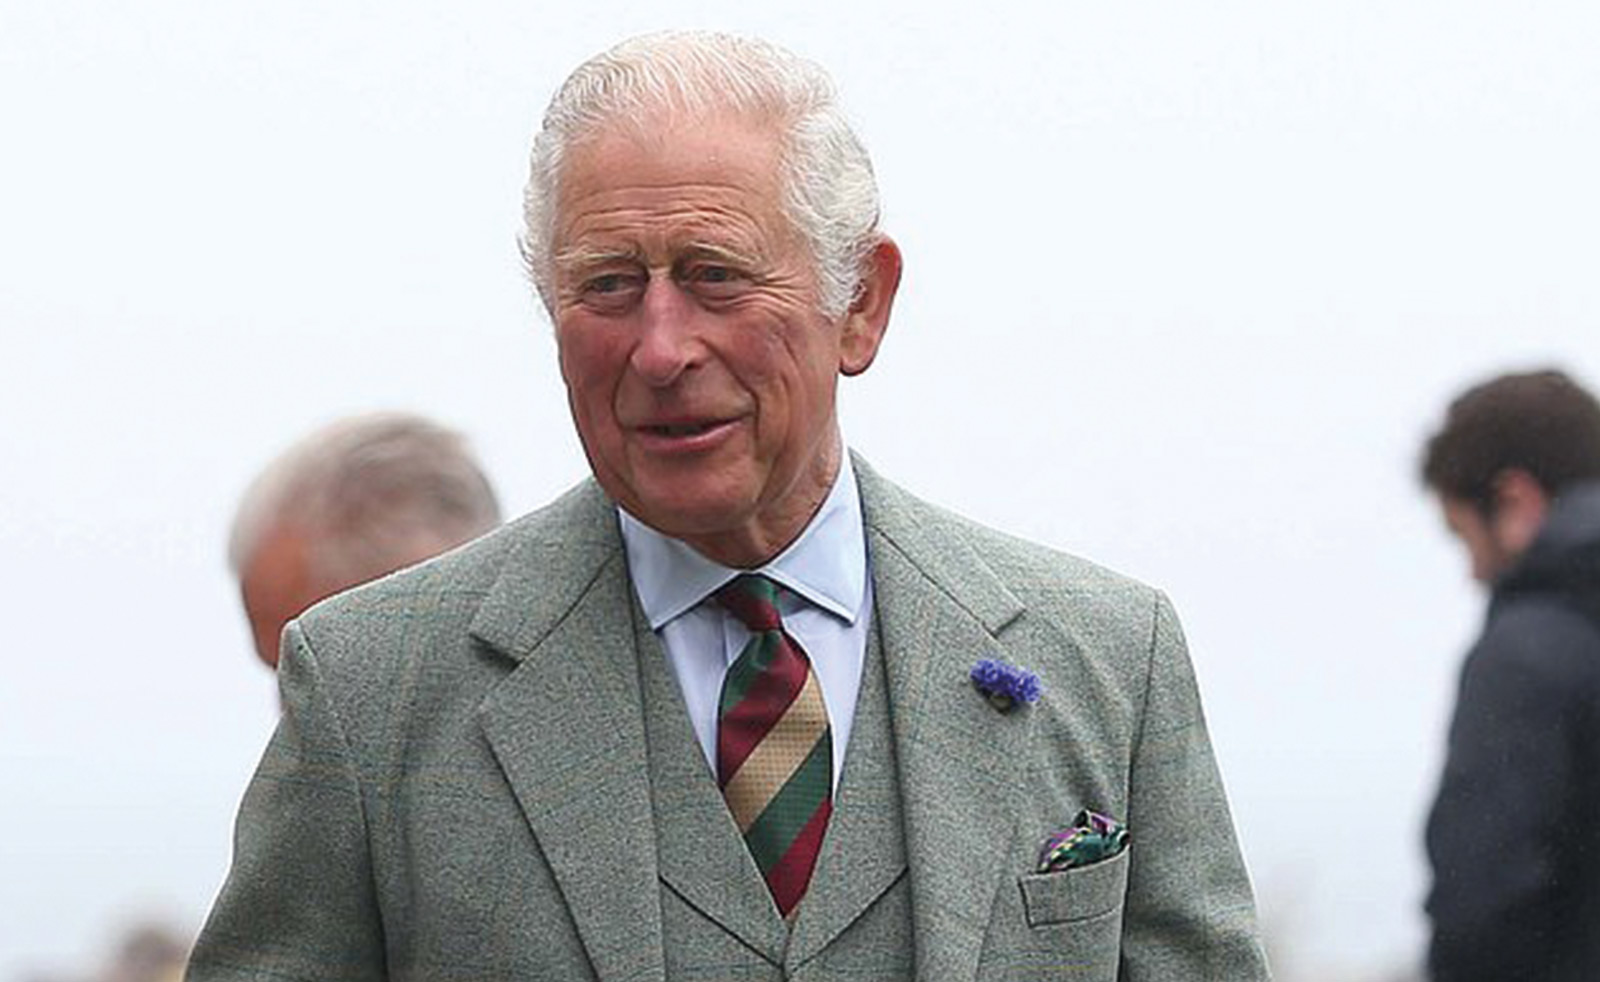 Charles for sale: Prince’s charity orders a probe as it’s revealed fixers offered wealthy donors dinner with him and a stay at Dumfries House for £100,000